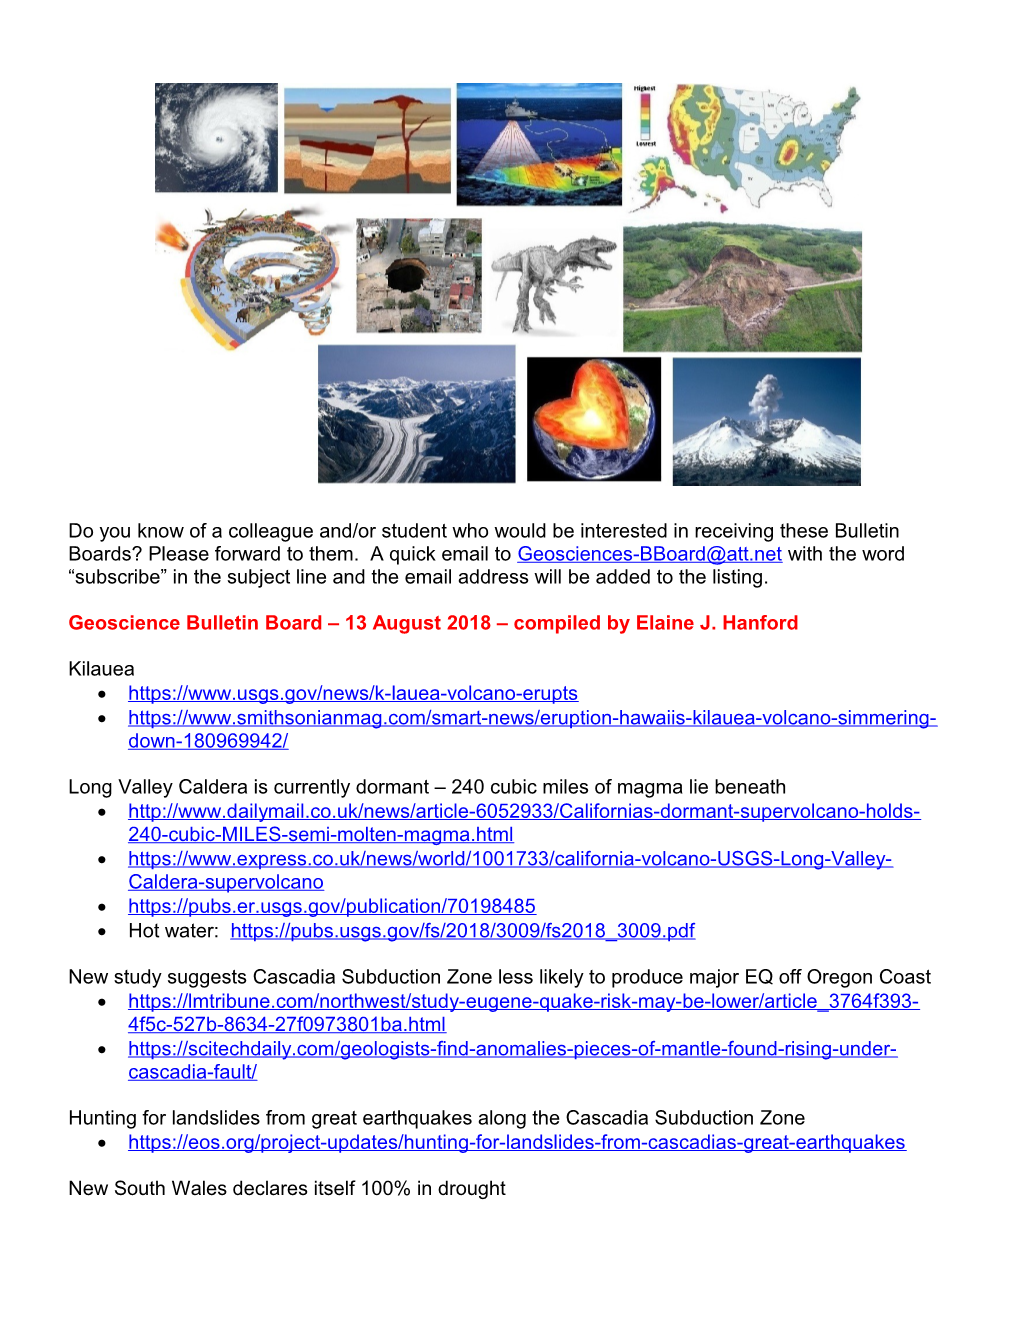 Geoscience Bulletin Board 13 August2018 Compiled by Elaine J. Hanford